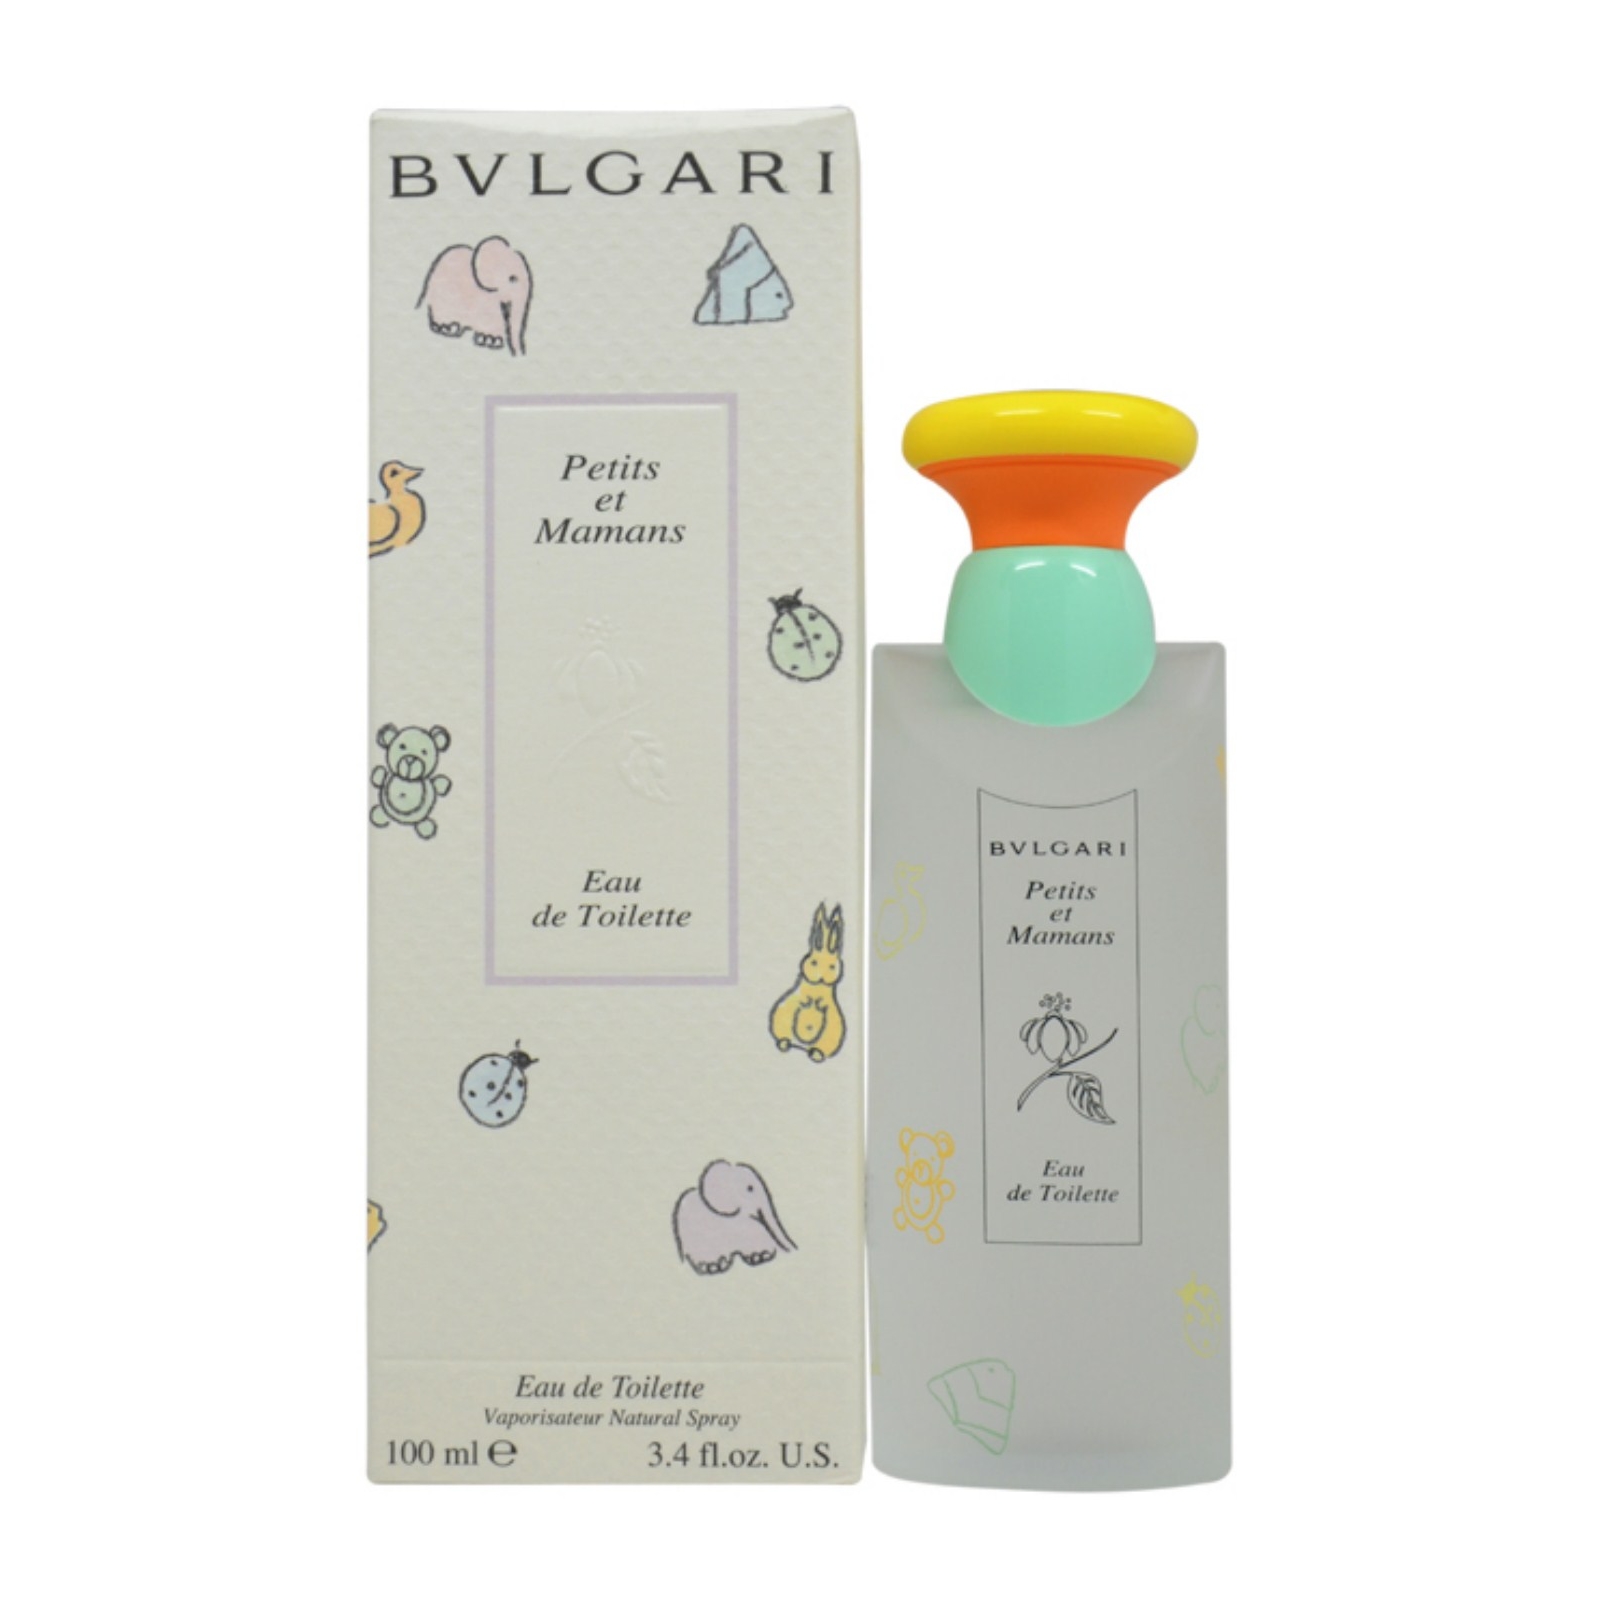 Bvlgari Petits et Mamans by  for Women - 3.4 oz EDT Spray